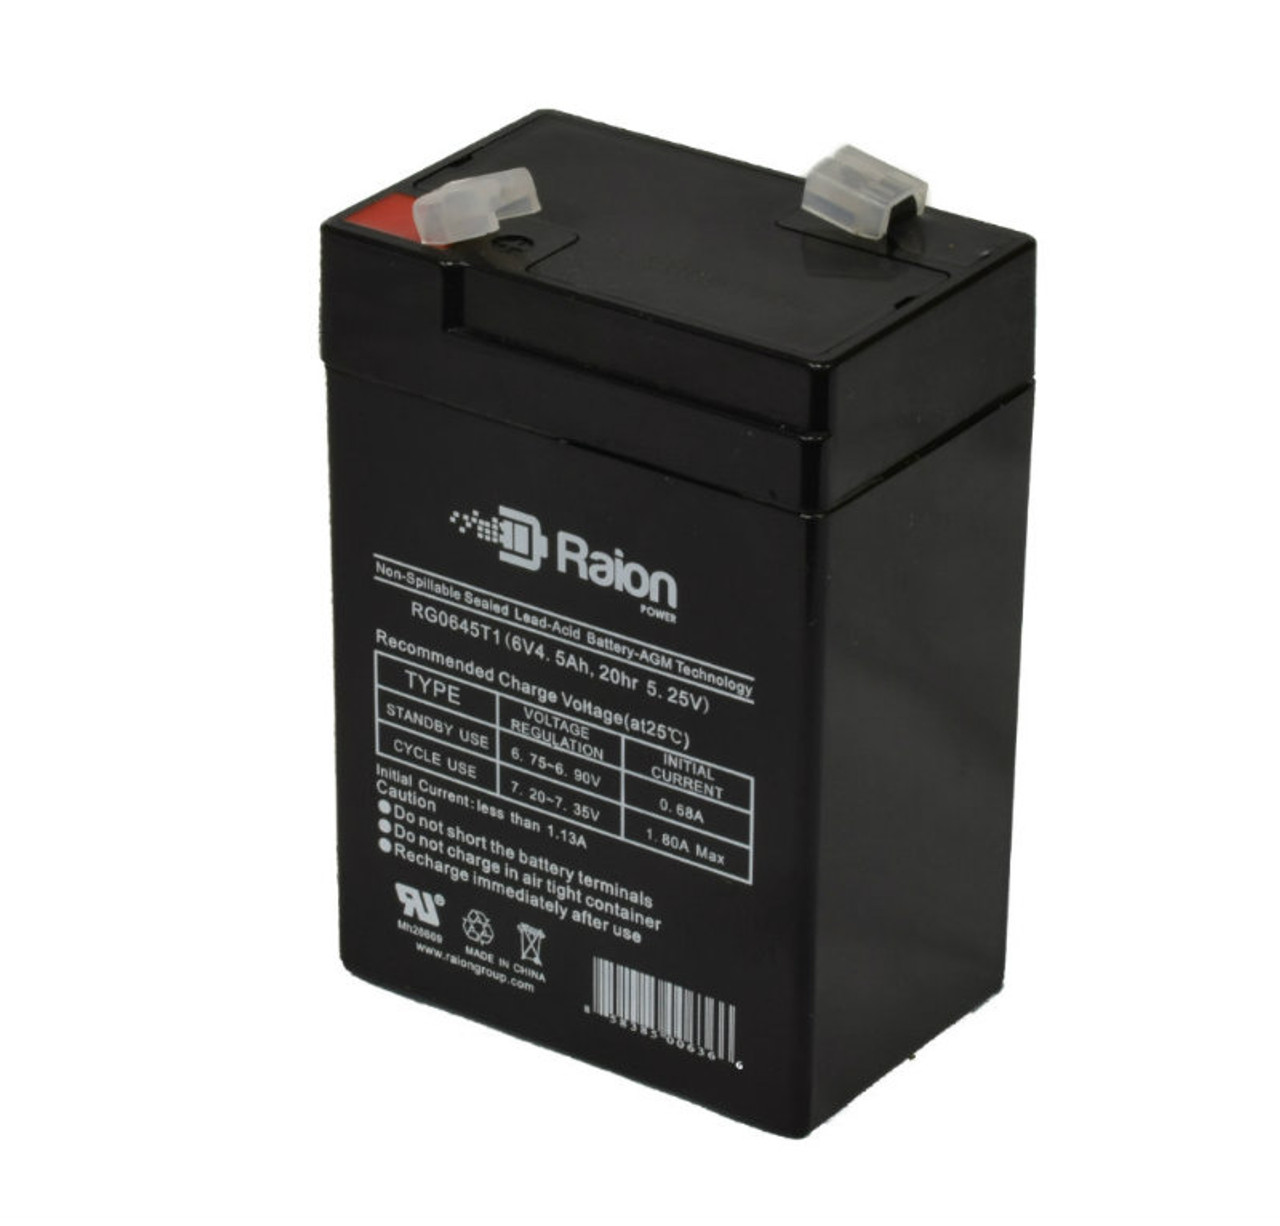 Raion Power RG0645T1 6V 4.5Ah Replacement Battery Cartridge for Delta HR 6-4.5